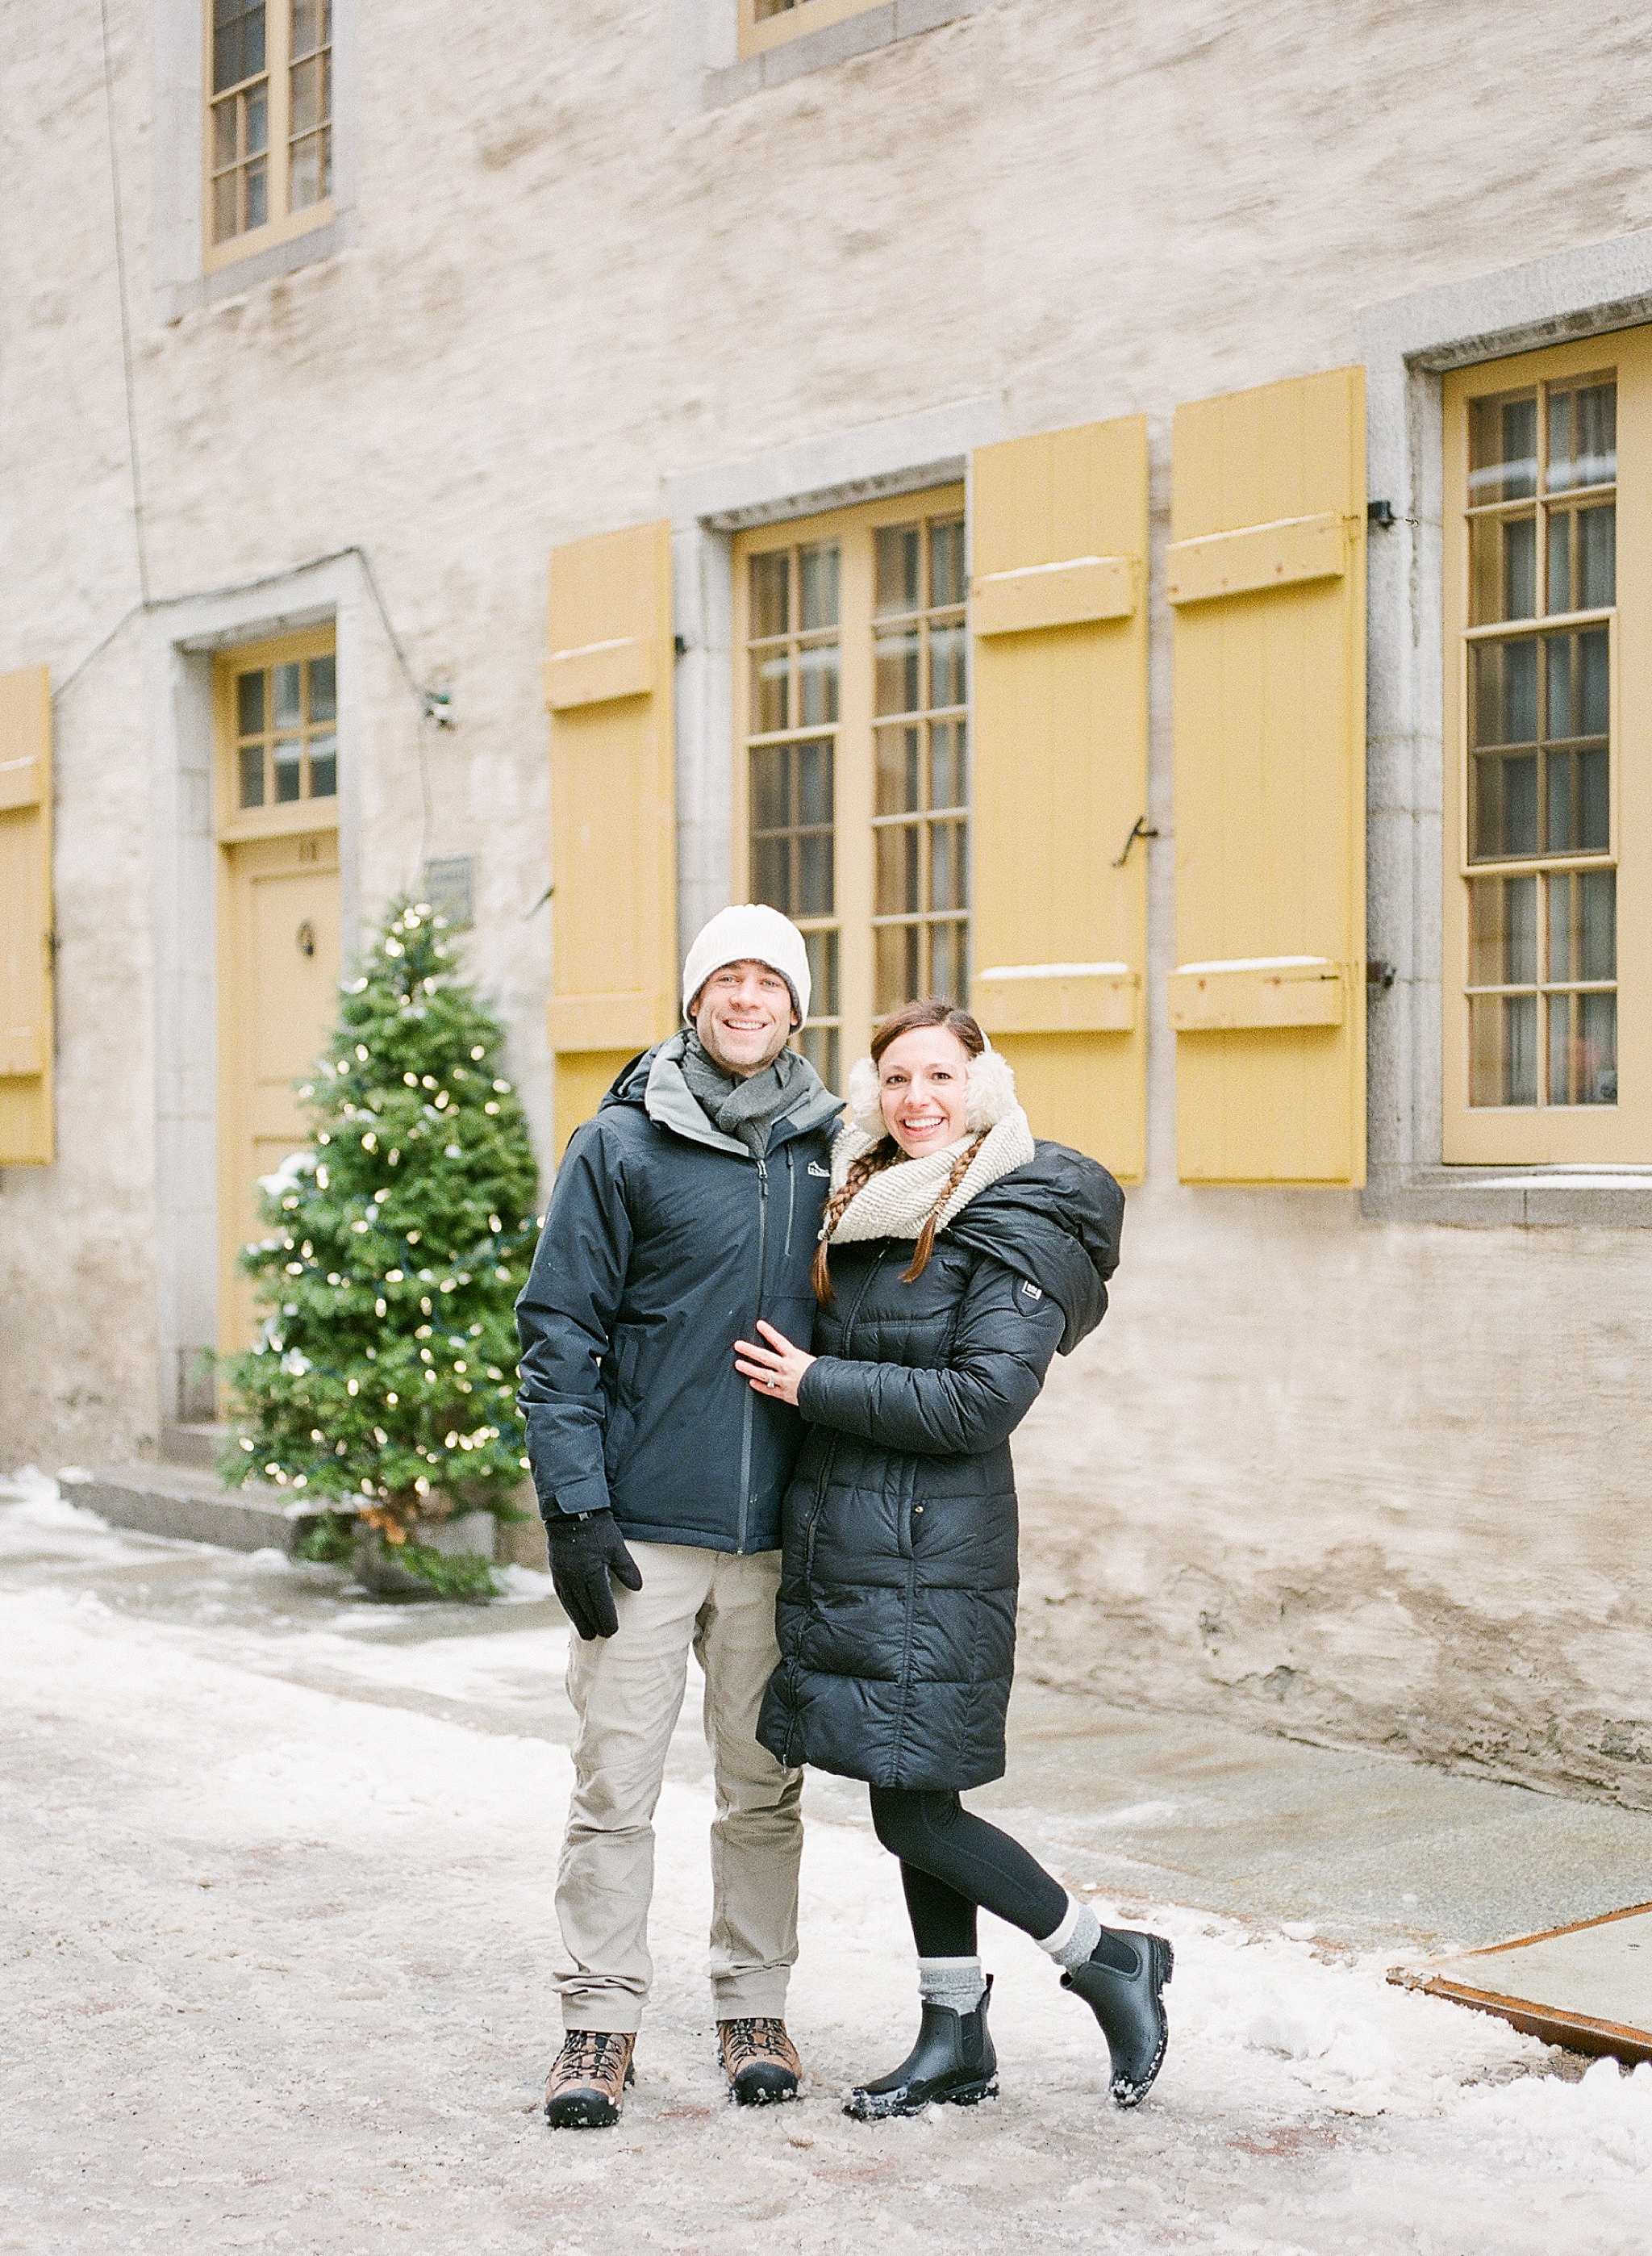 This Washington, DC wedding photographer travels to Quebec City, Canada and photographs the iconic town on film. 